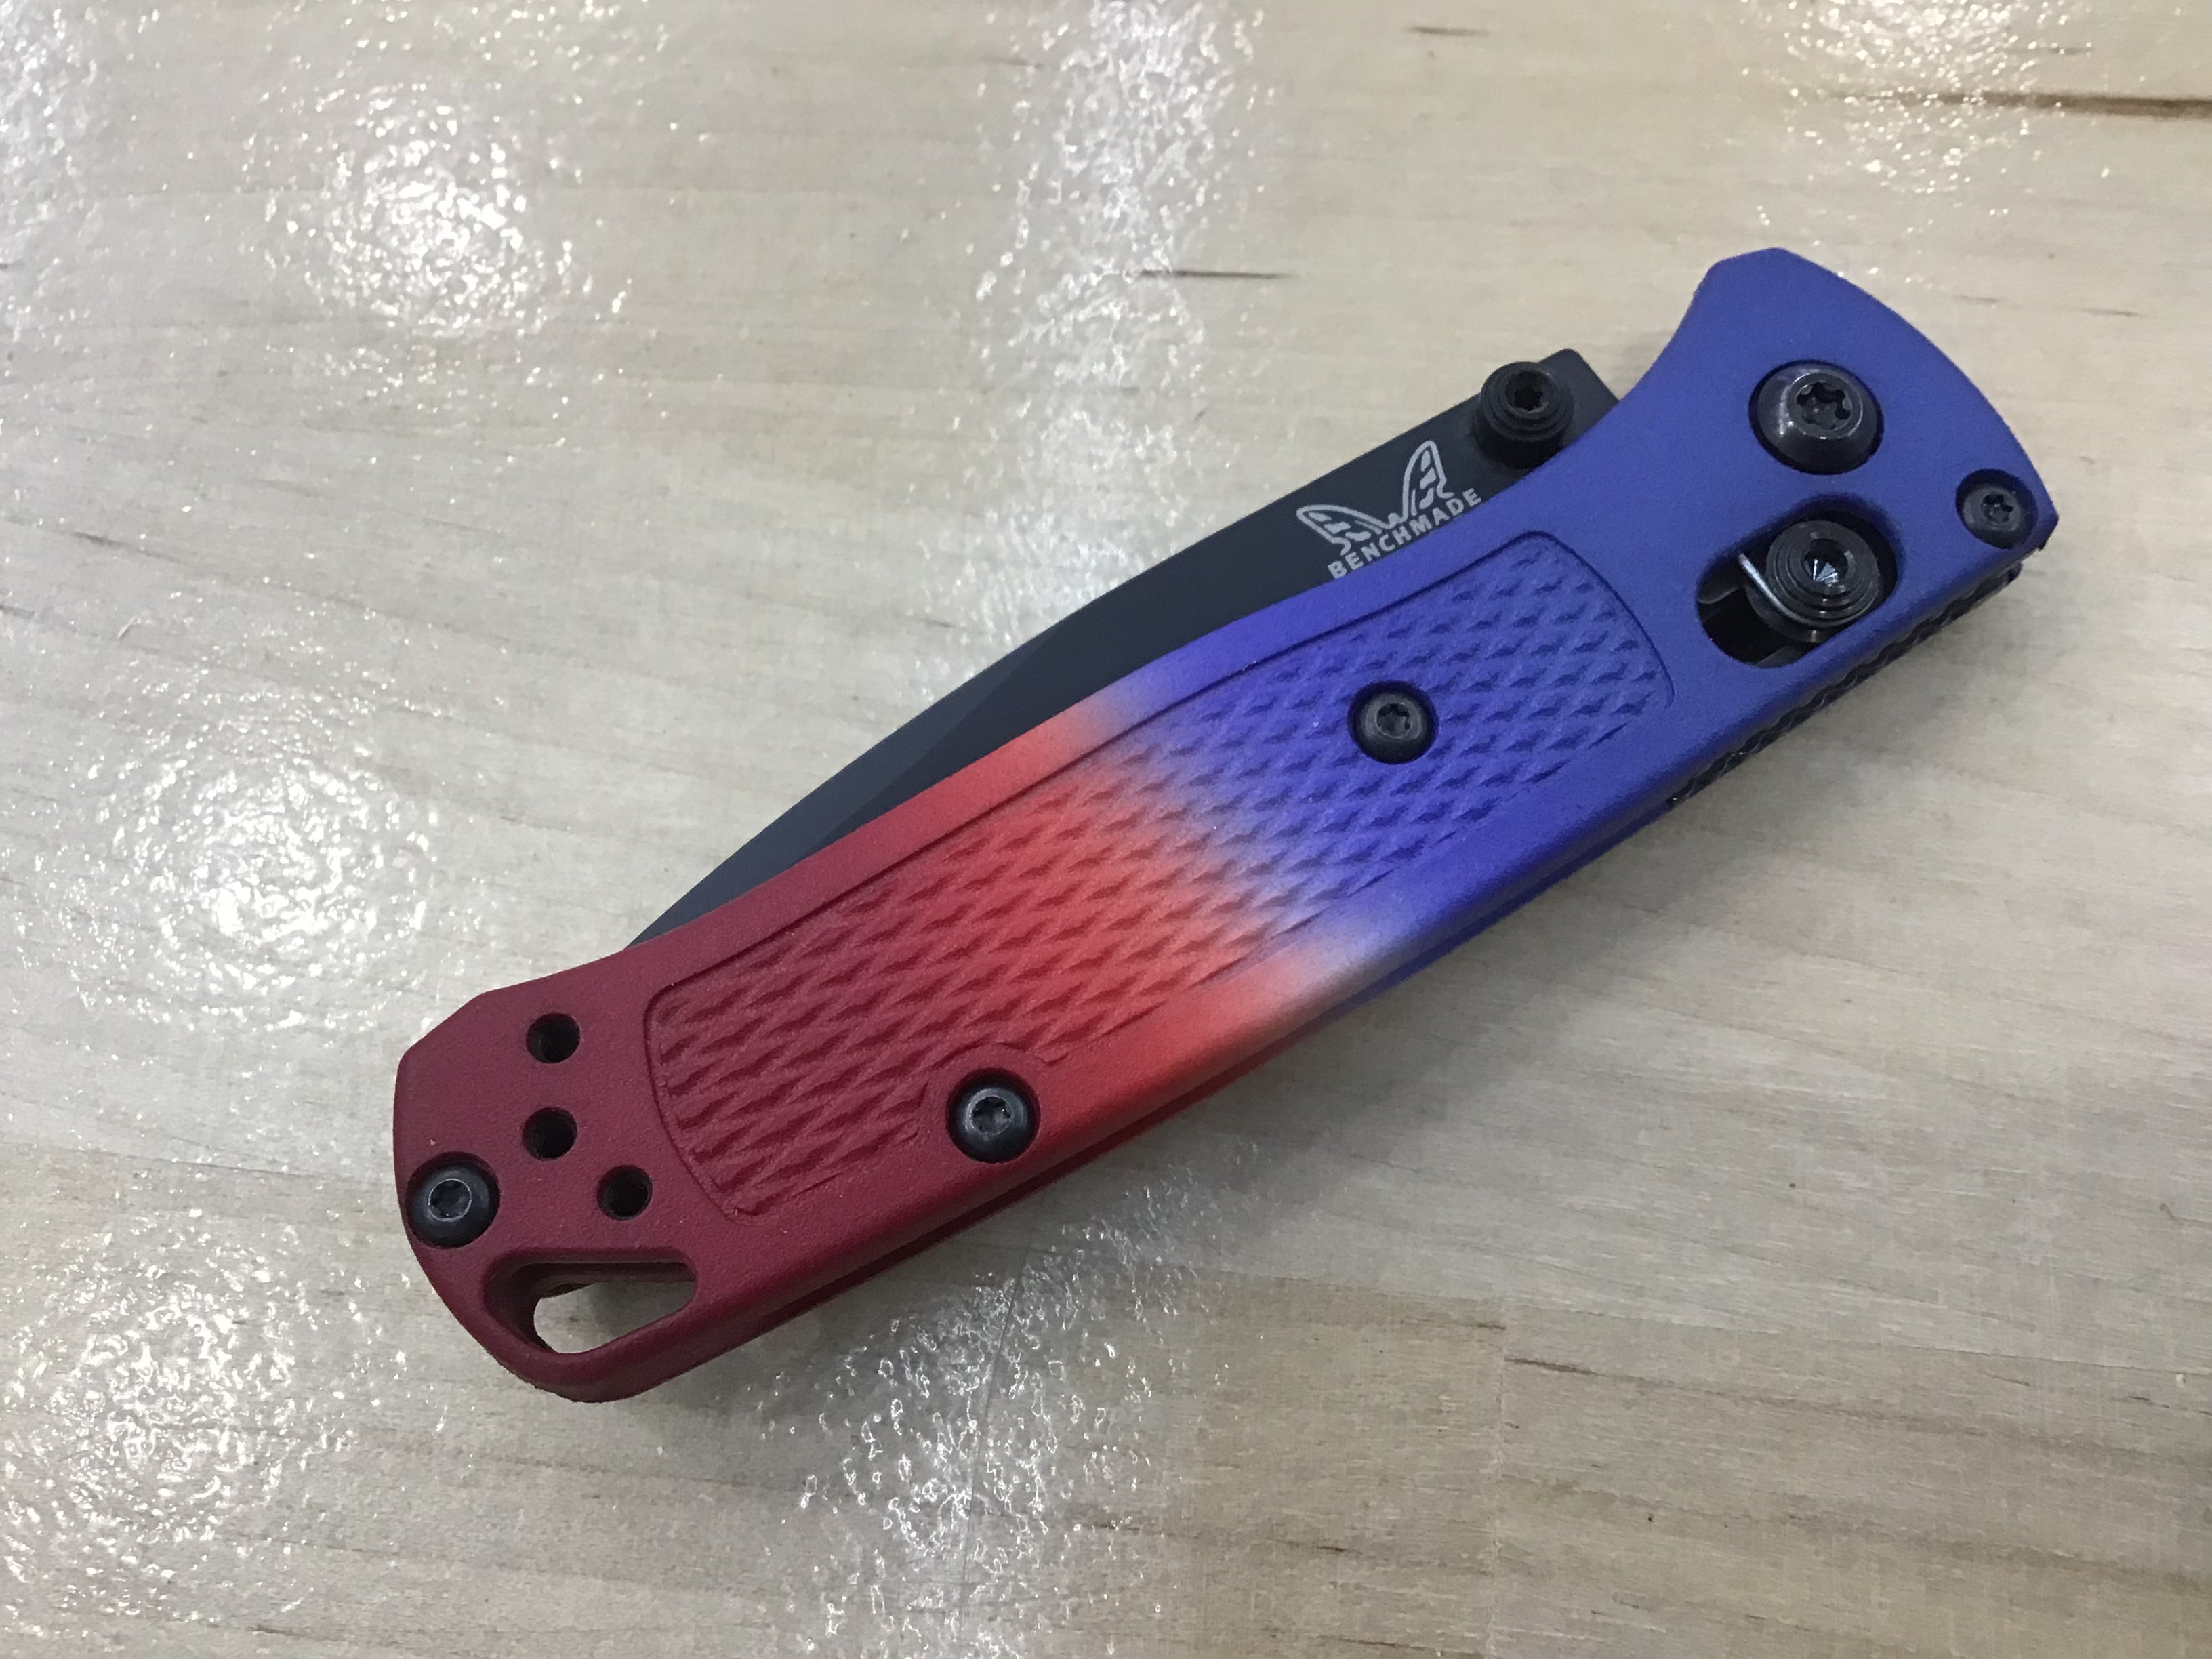 Benchmade Bomb Pop Mini Bugout Custom Red & Blue Dyed Scales CPM-S30V Black Blade  533BK-1CuBP